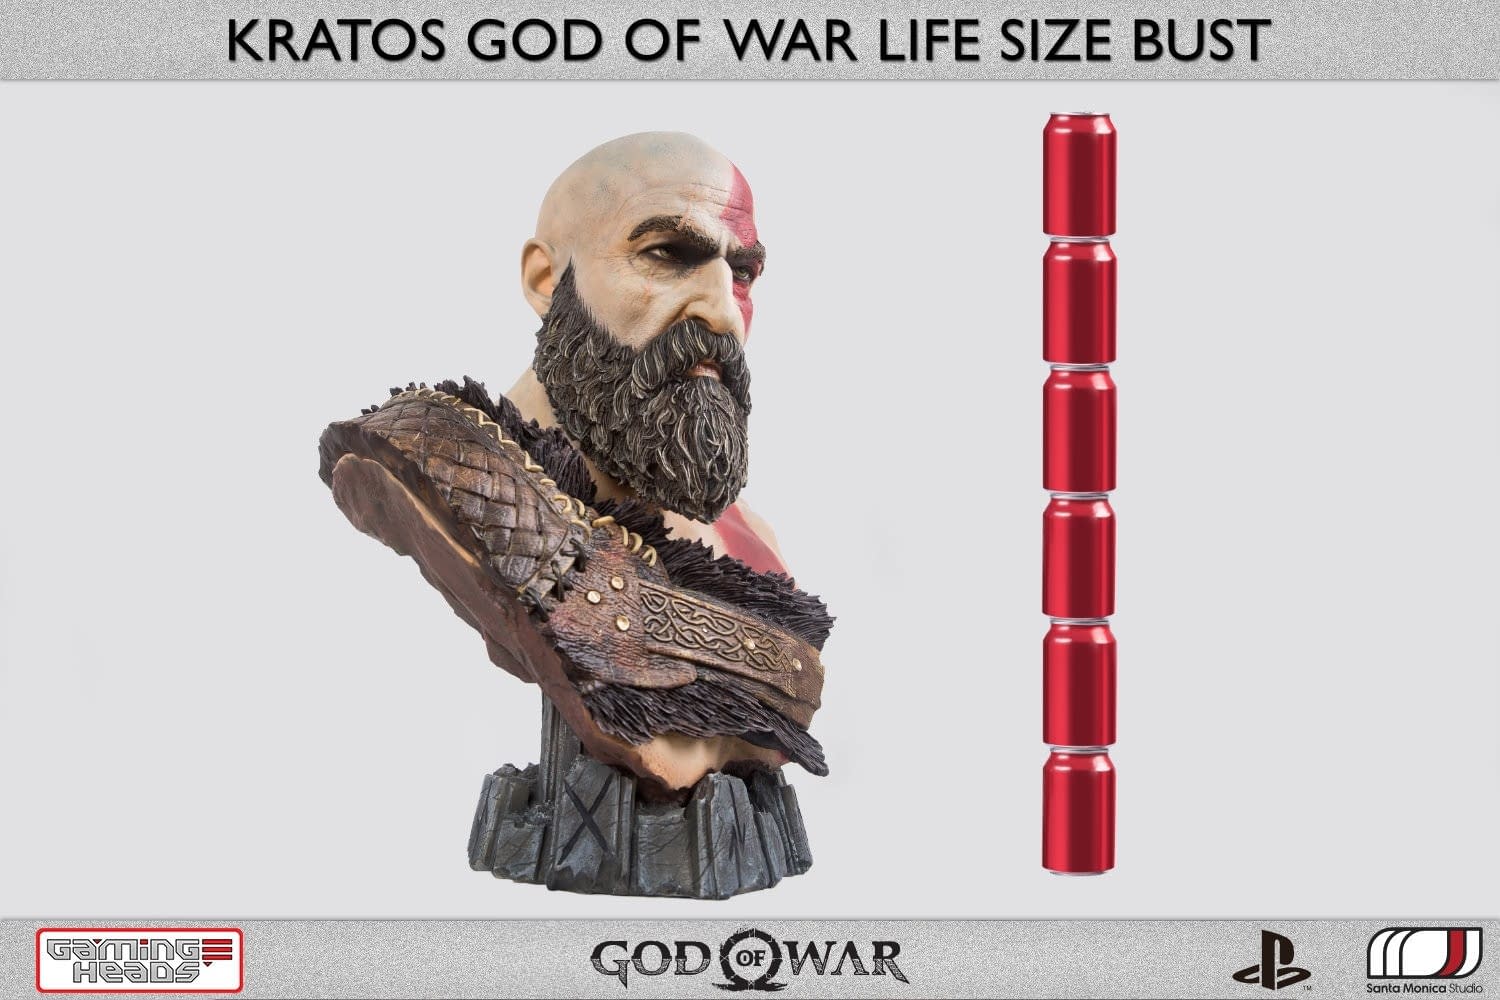 God of War Kratos Life Size Bust from Gaming Heads